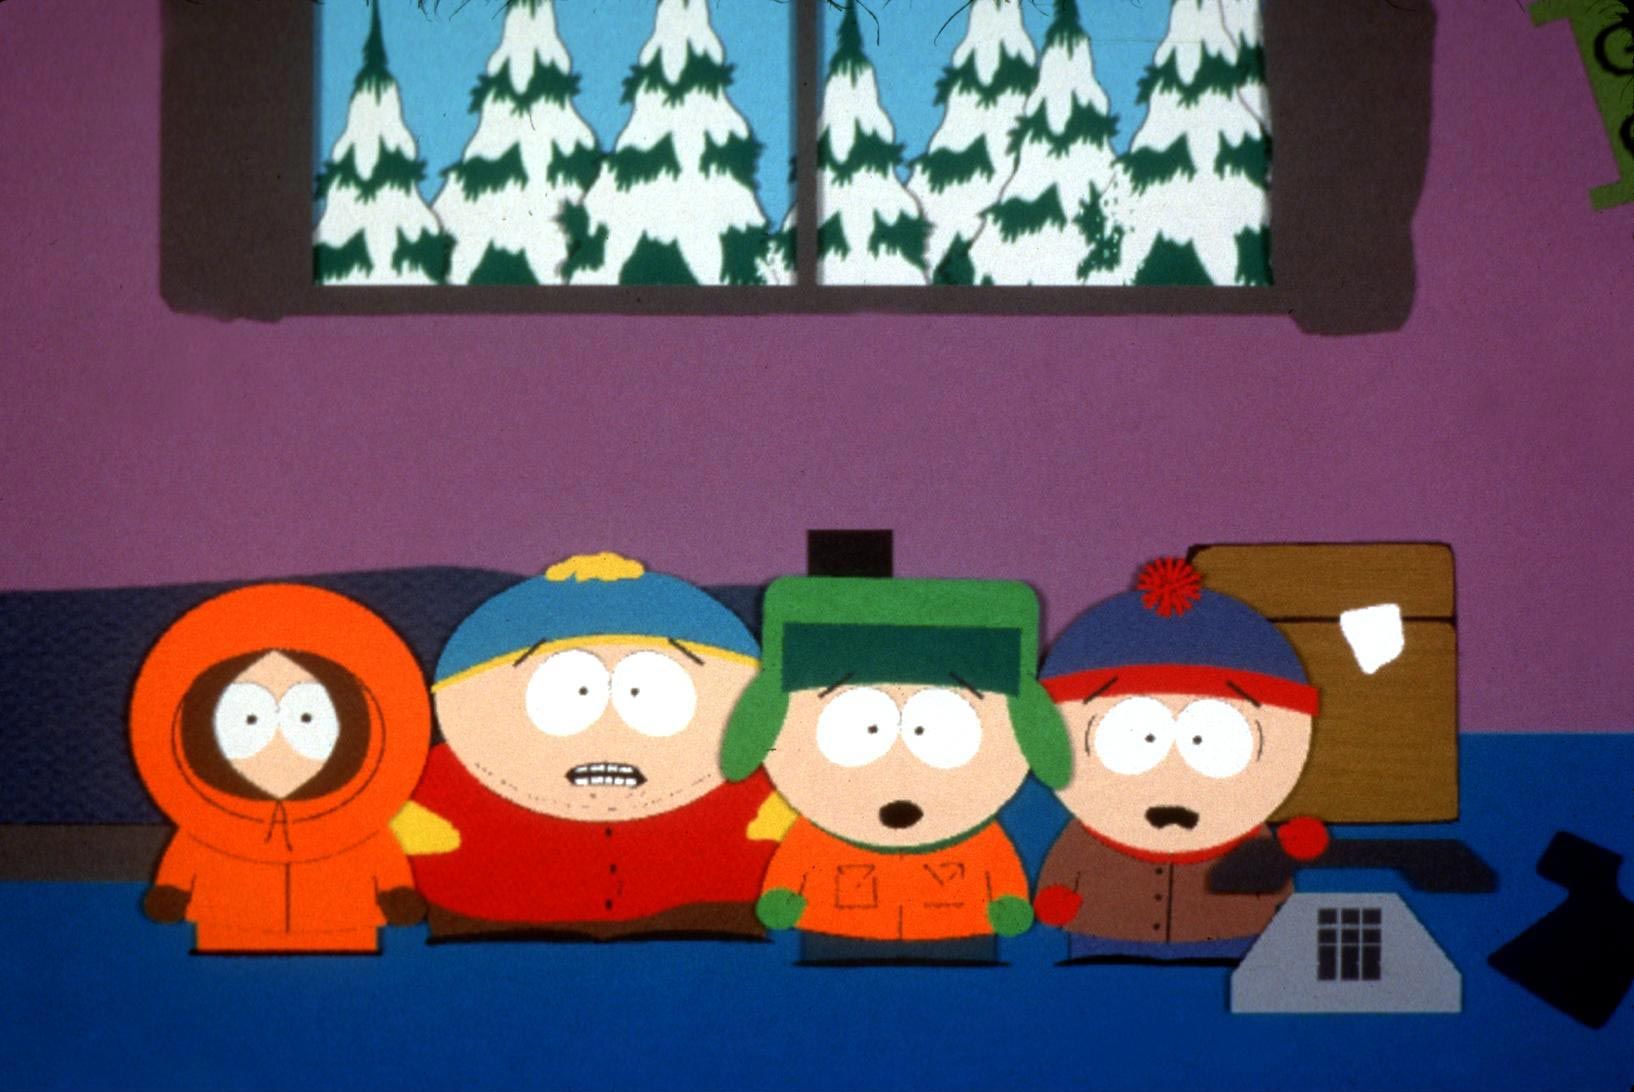 south park without hats episode